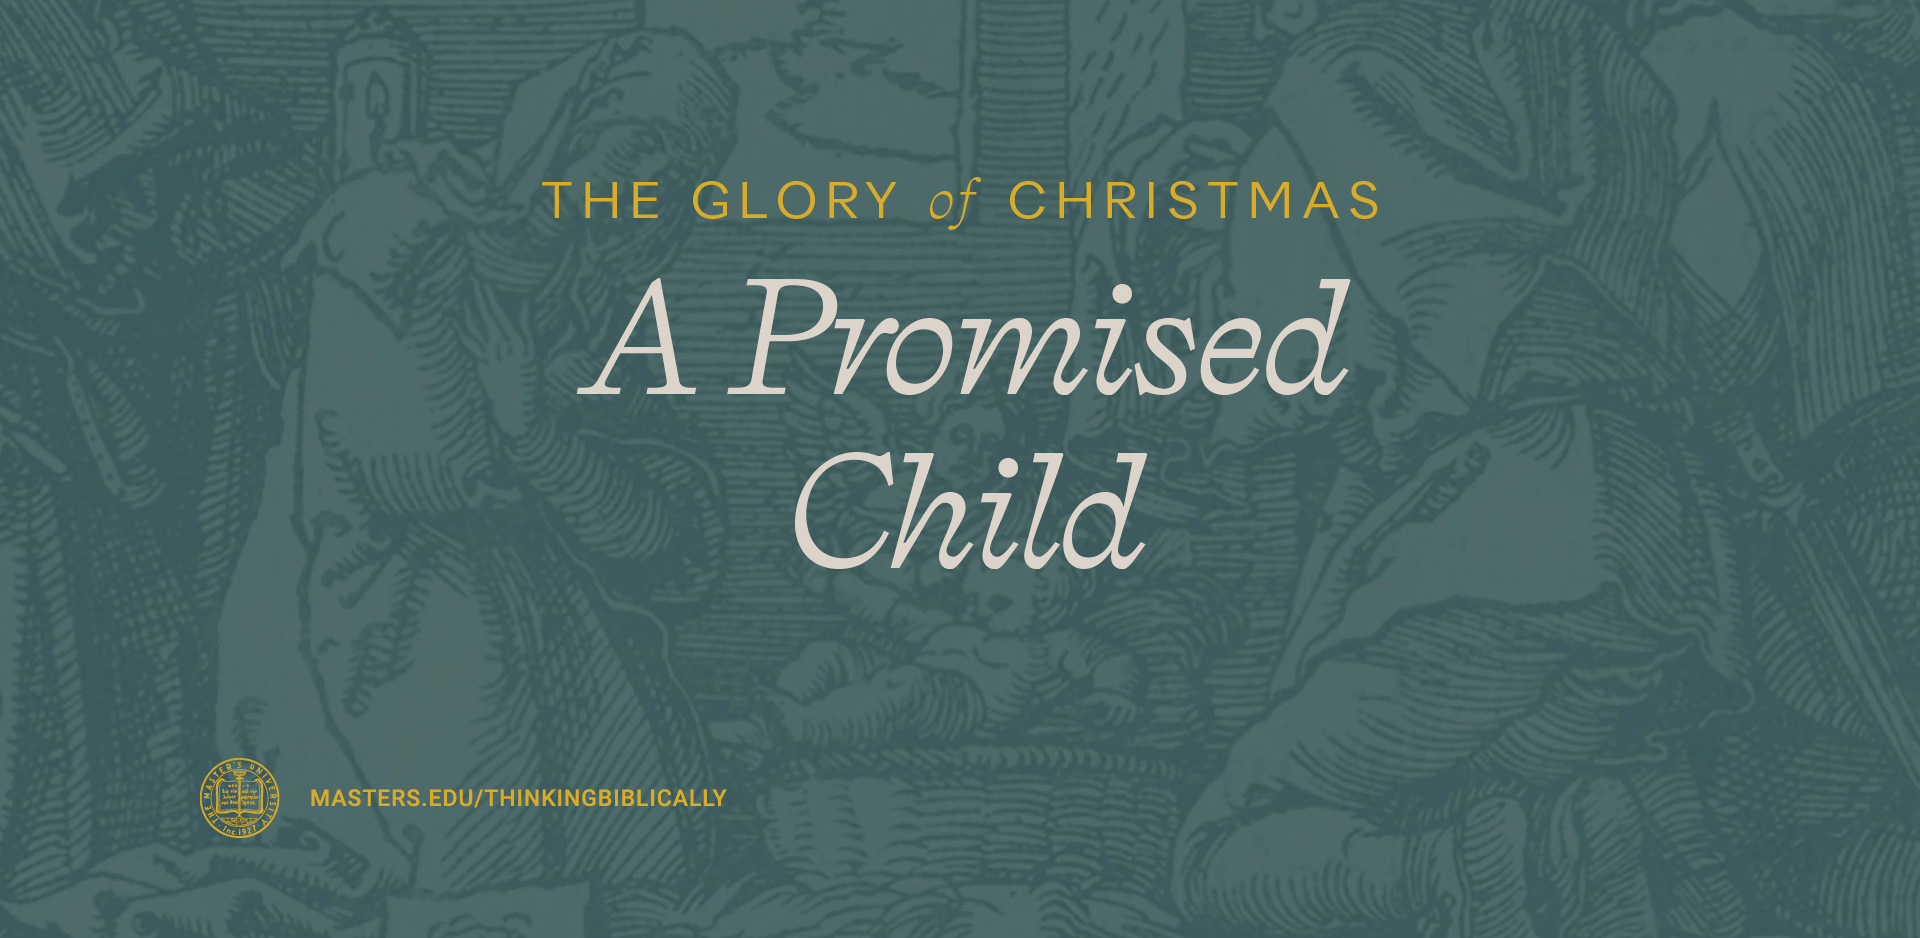 A Promised Child Featured Image